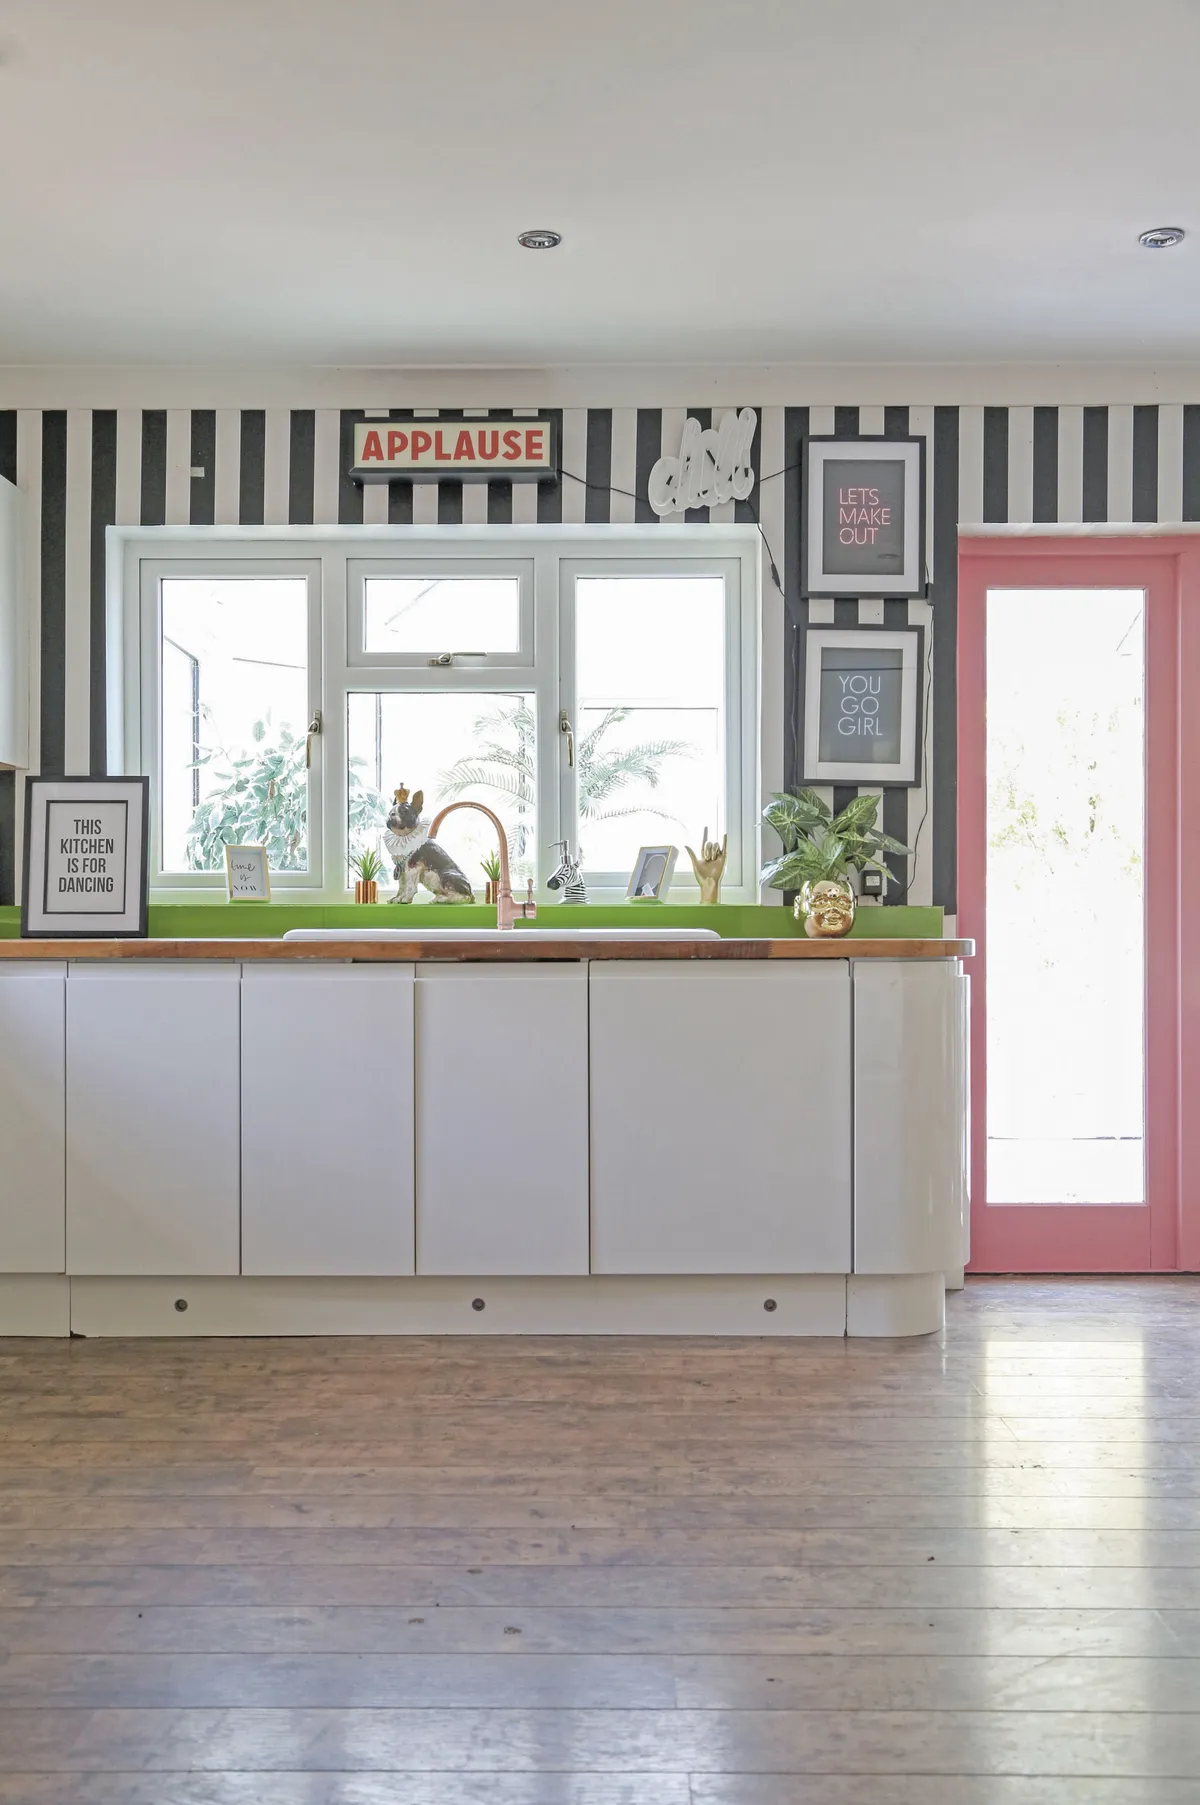 ‘We had a new kitchen fitted by Magnet, and new French doors leading into the conservatory,’ Hayley explains. ‘Now, it’s so much more spacious and streamlined.’ Not one to miss an opportunity for bold colour, Hayley went for a door frame in a bubblegum pink